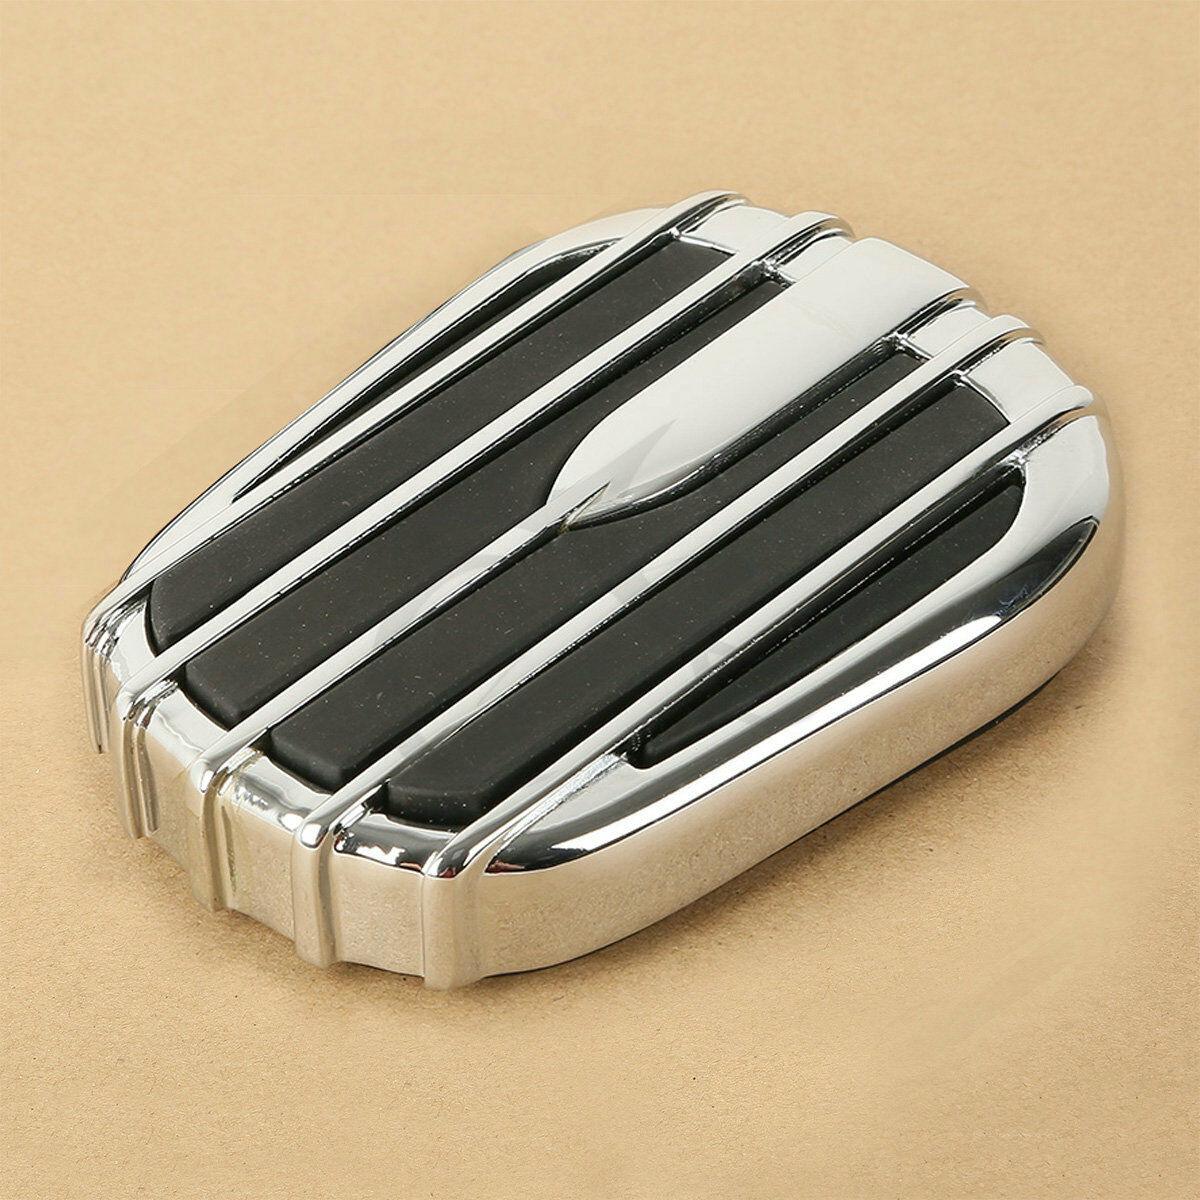 Chrome Brake Pedal Pad Cover Fit For Harley Touring 80-22 18 19 Softail FL 86-17 - Moto Life Products